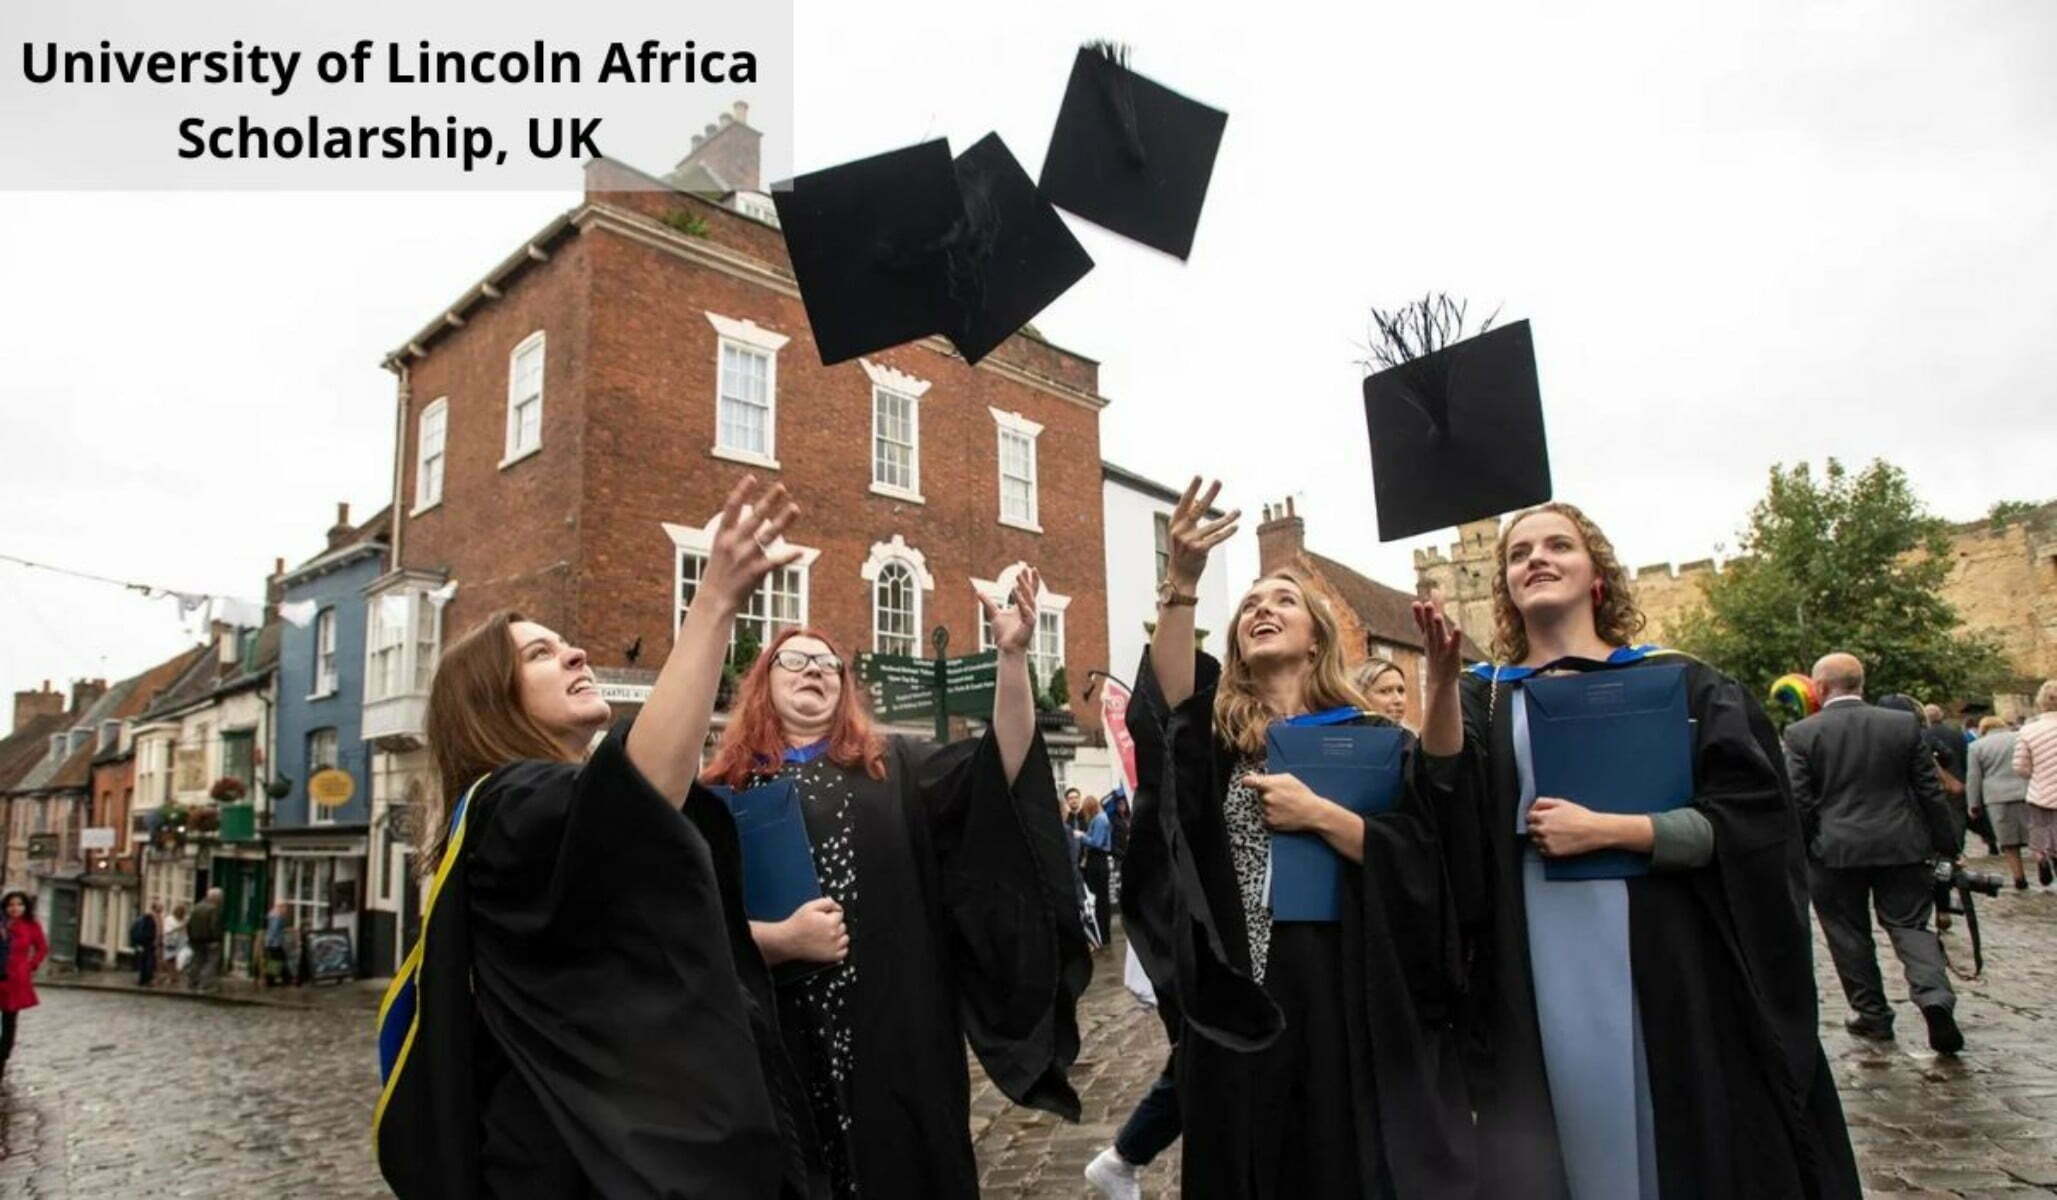 University of Lincoln Africa Scholarship 2022 for African Students UK